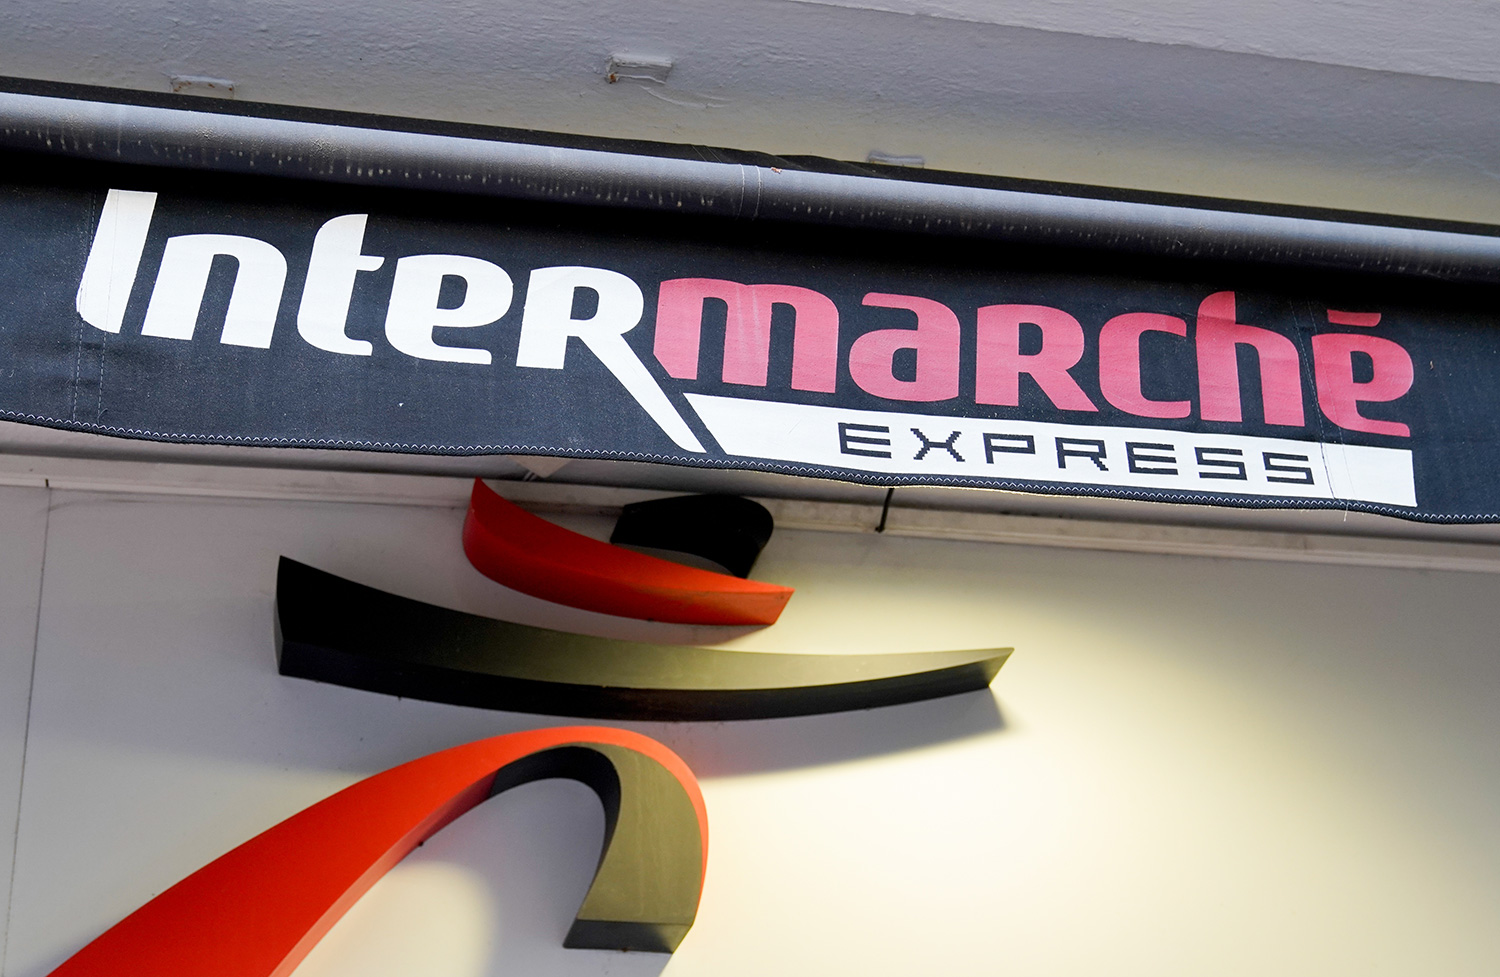 Intermarché express